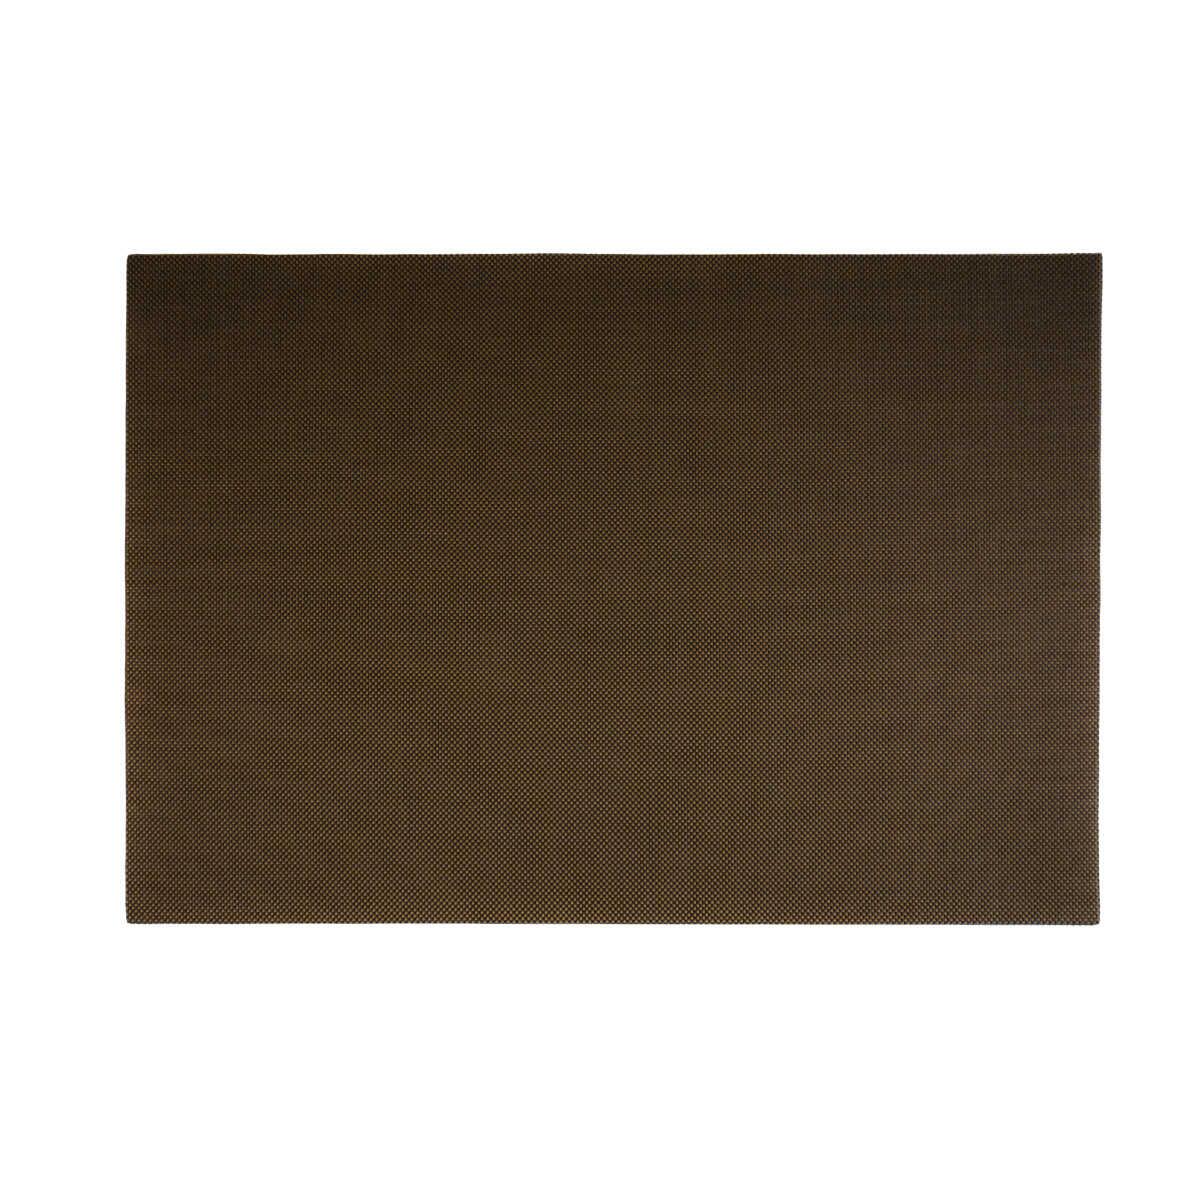 Maxstyle Harmony Mocca 4 Piece Placemat Set 30x45 cm